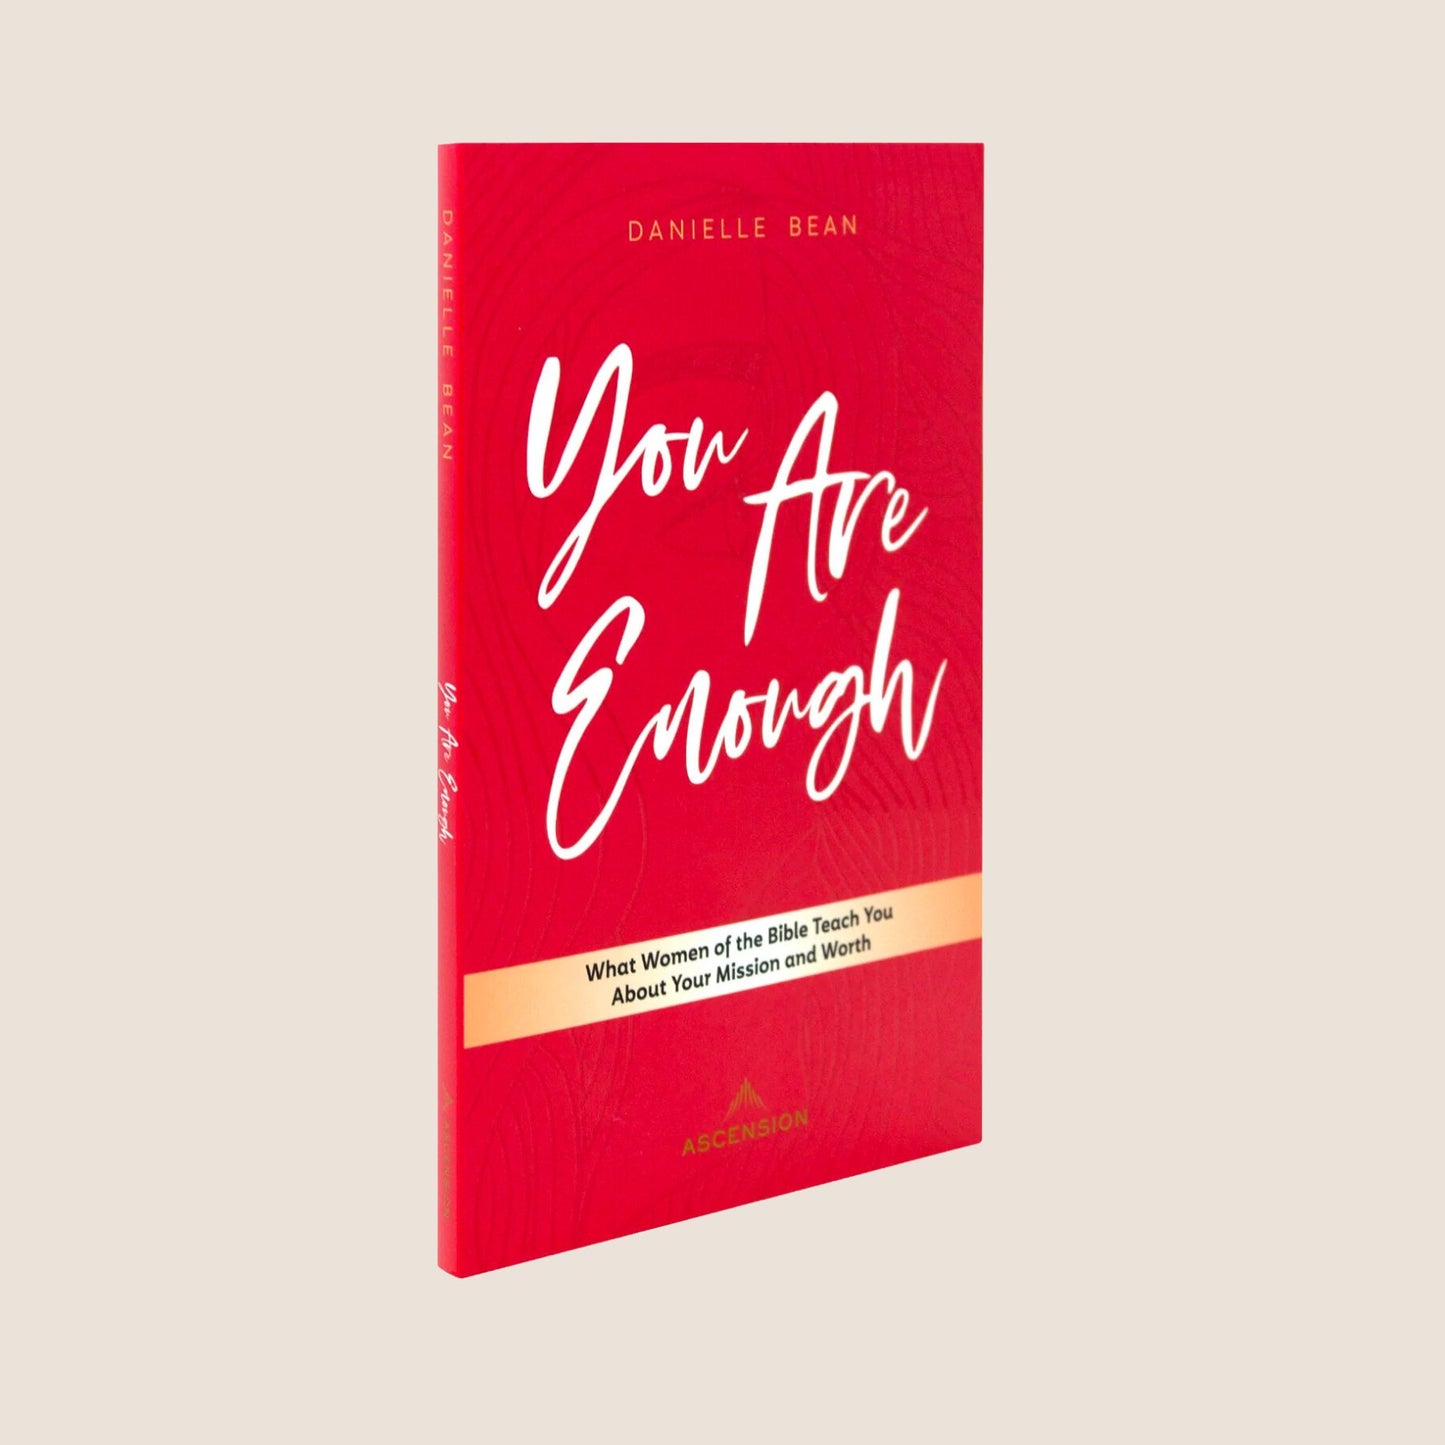 [PRE-ORDER] You Are Enough: What Women of the Bible Teach You About Your Mission and Worth